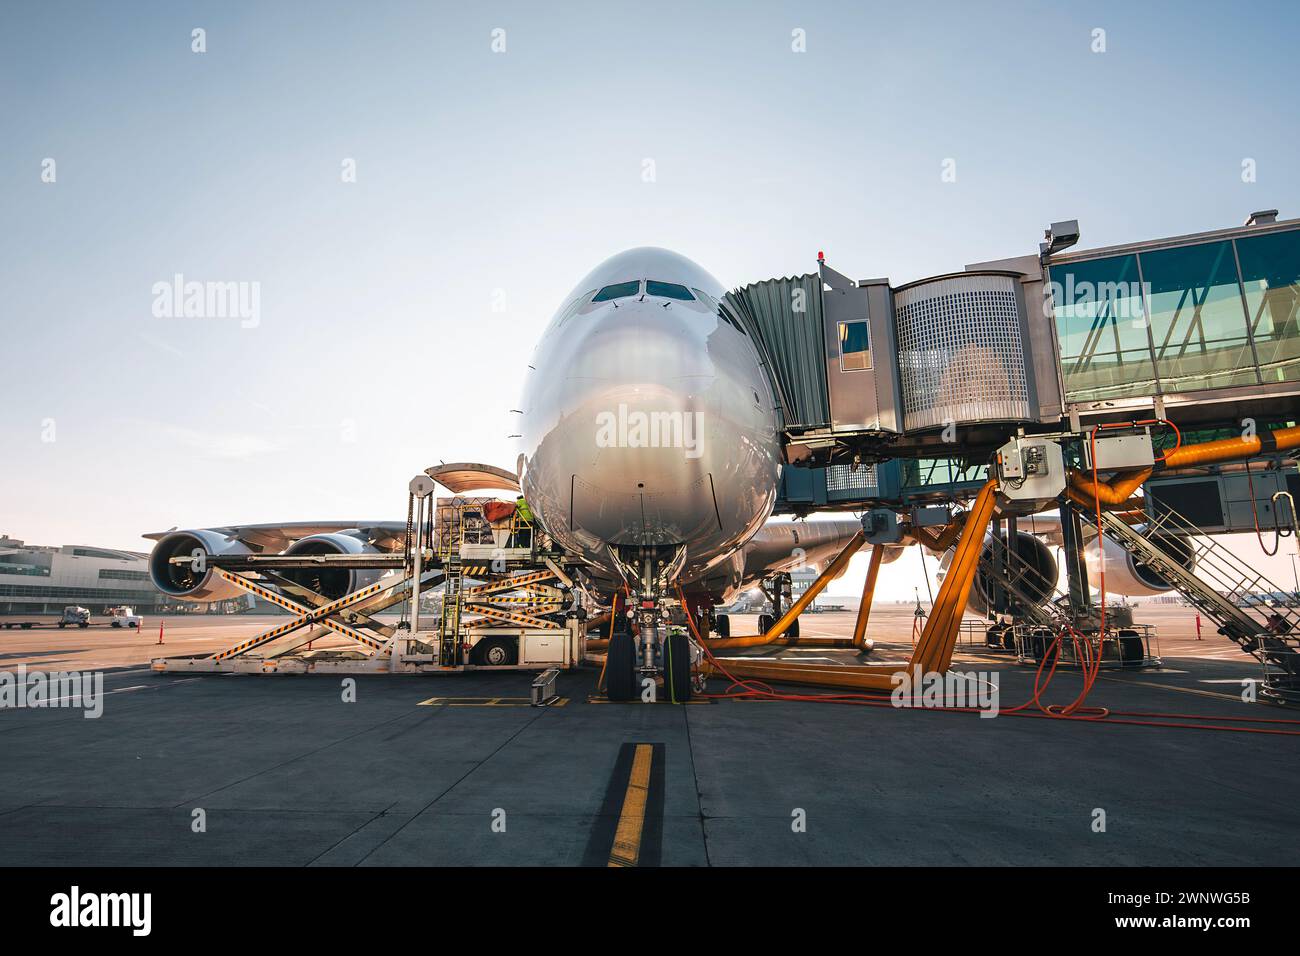 Loading of airplane before departure. Front view of plane at airport on sunny day. Stock Photo